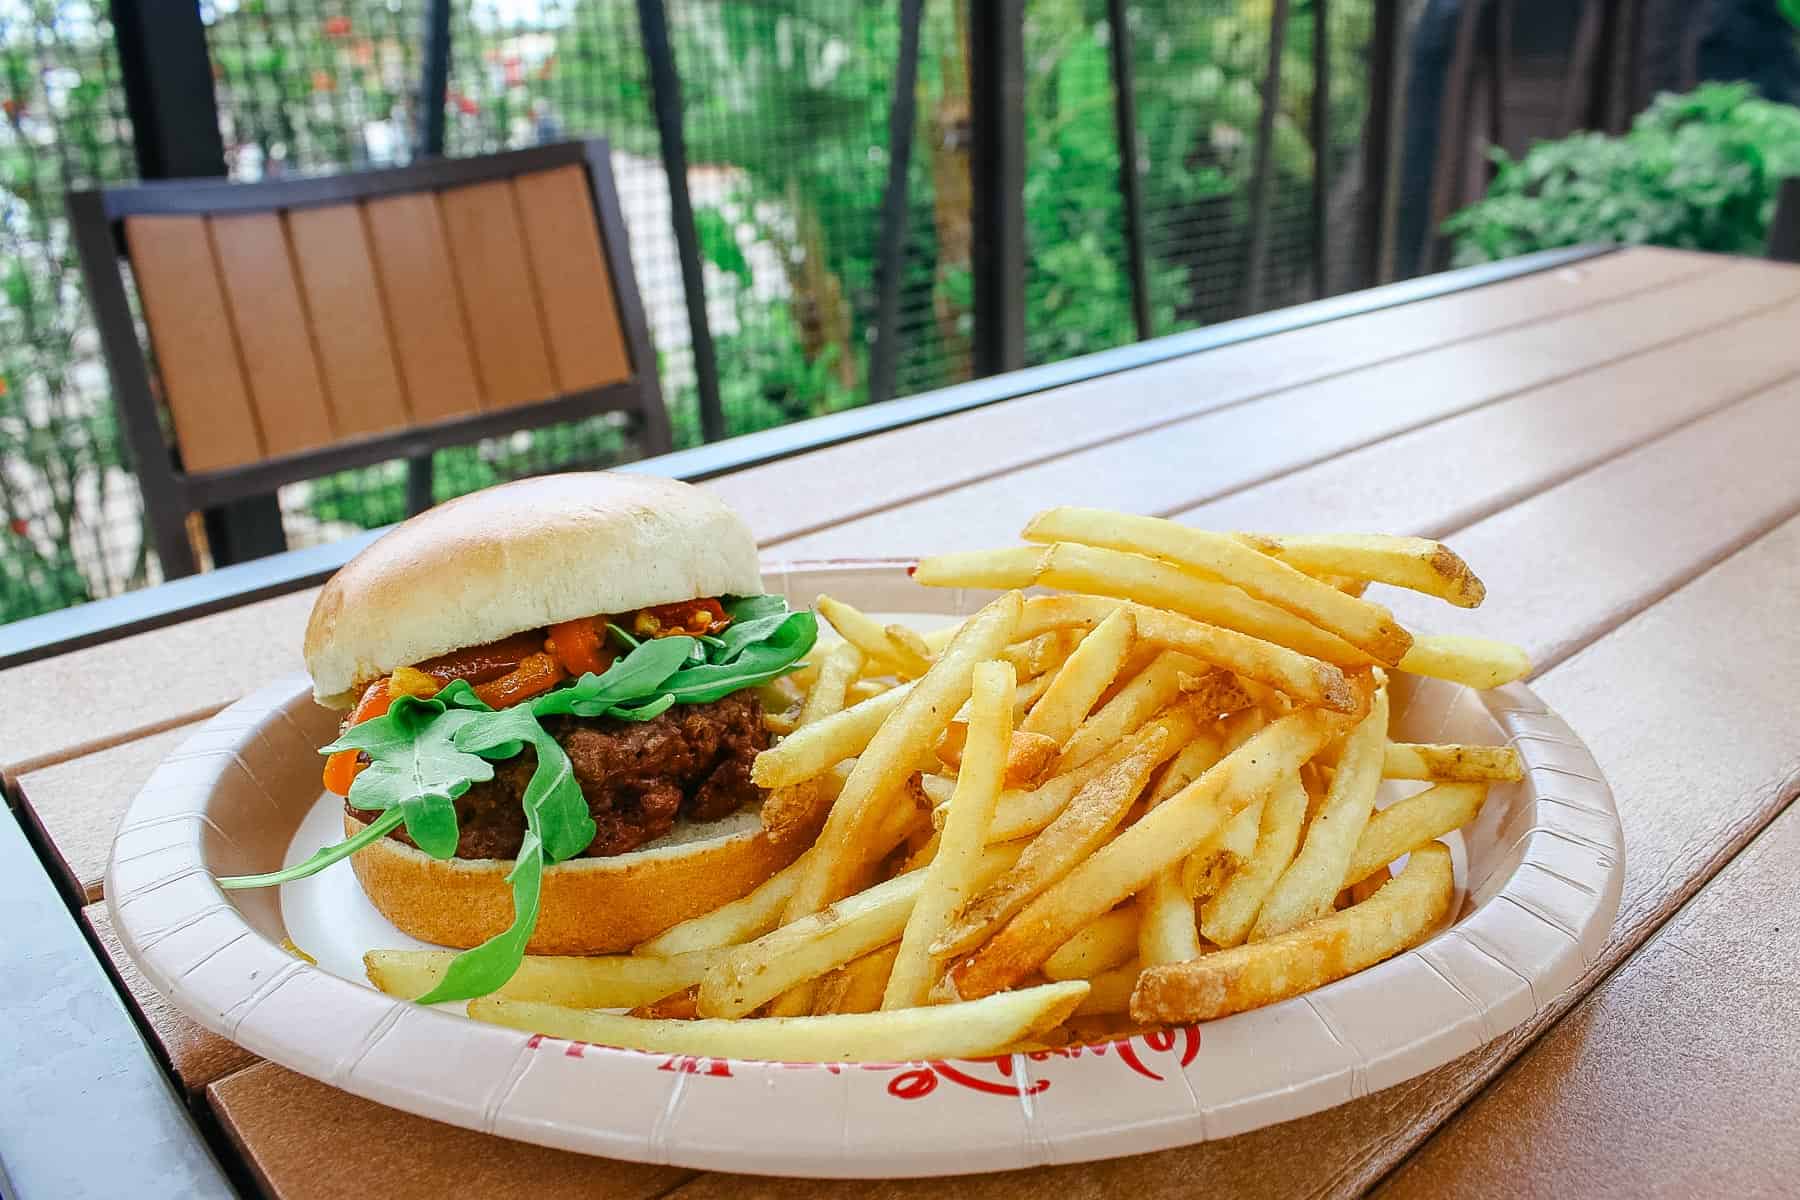 Topped with Arugula and Roasted Red Pepper-Tomato Chutney on a Brioche Bun served with French Fries
